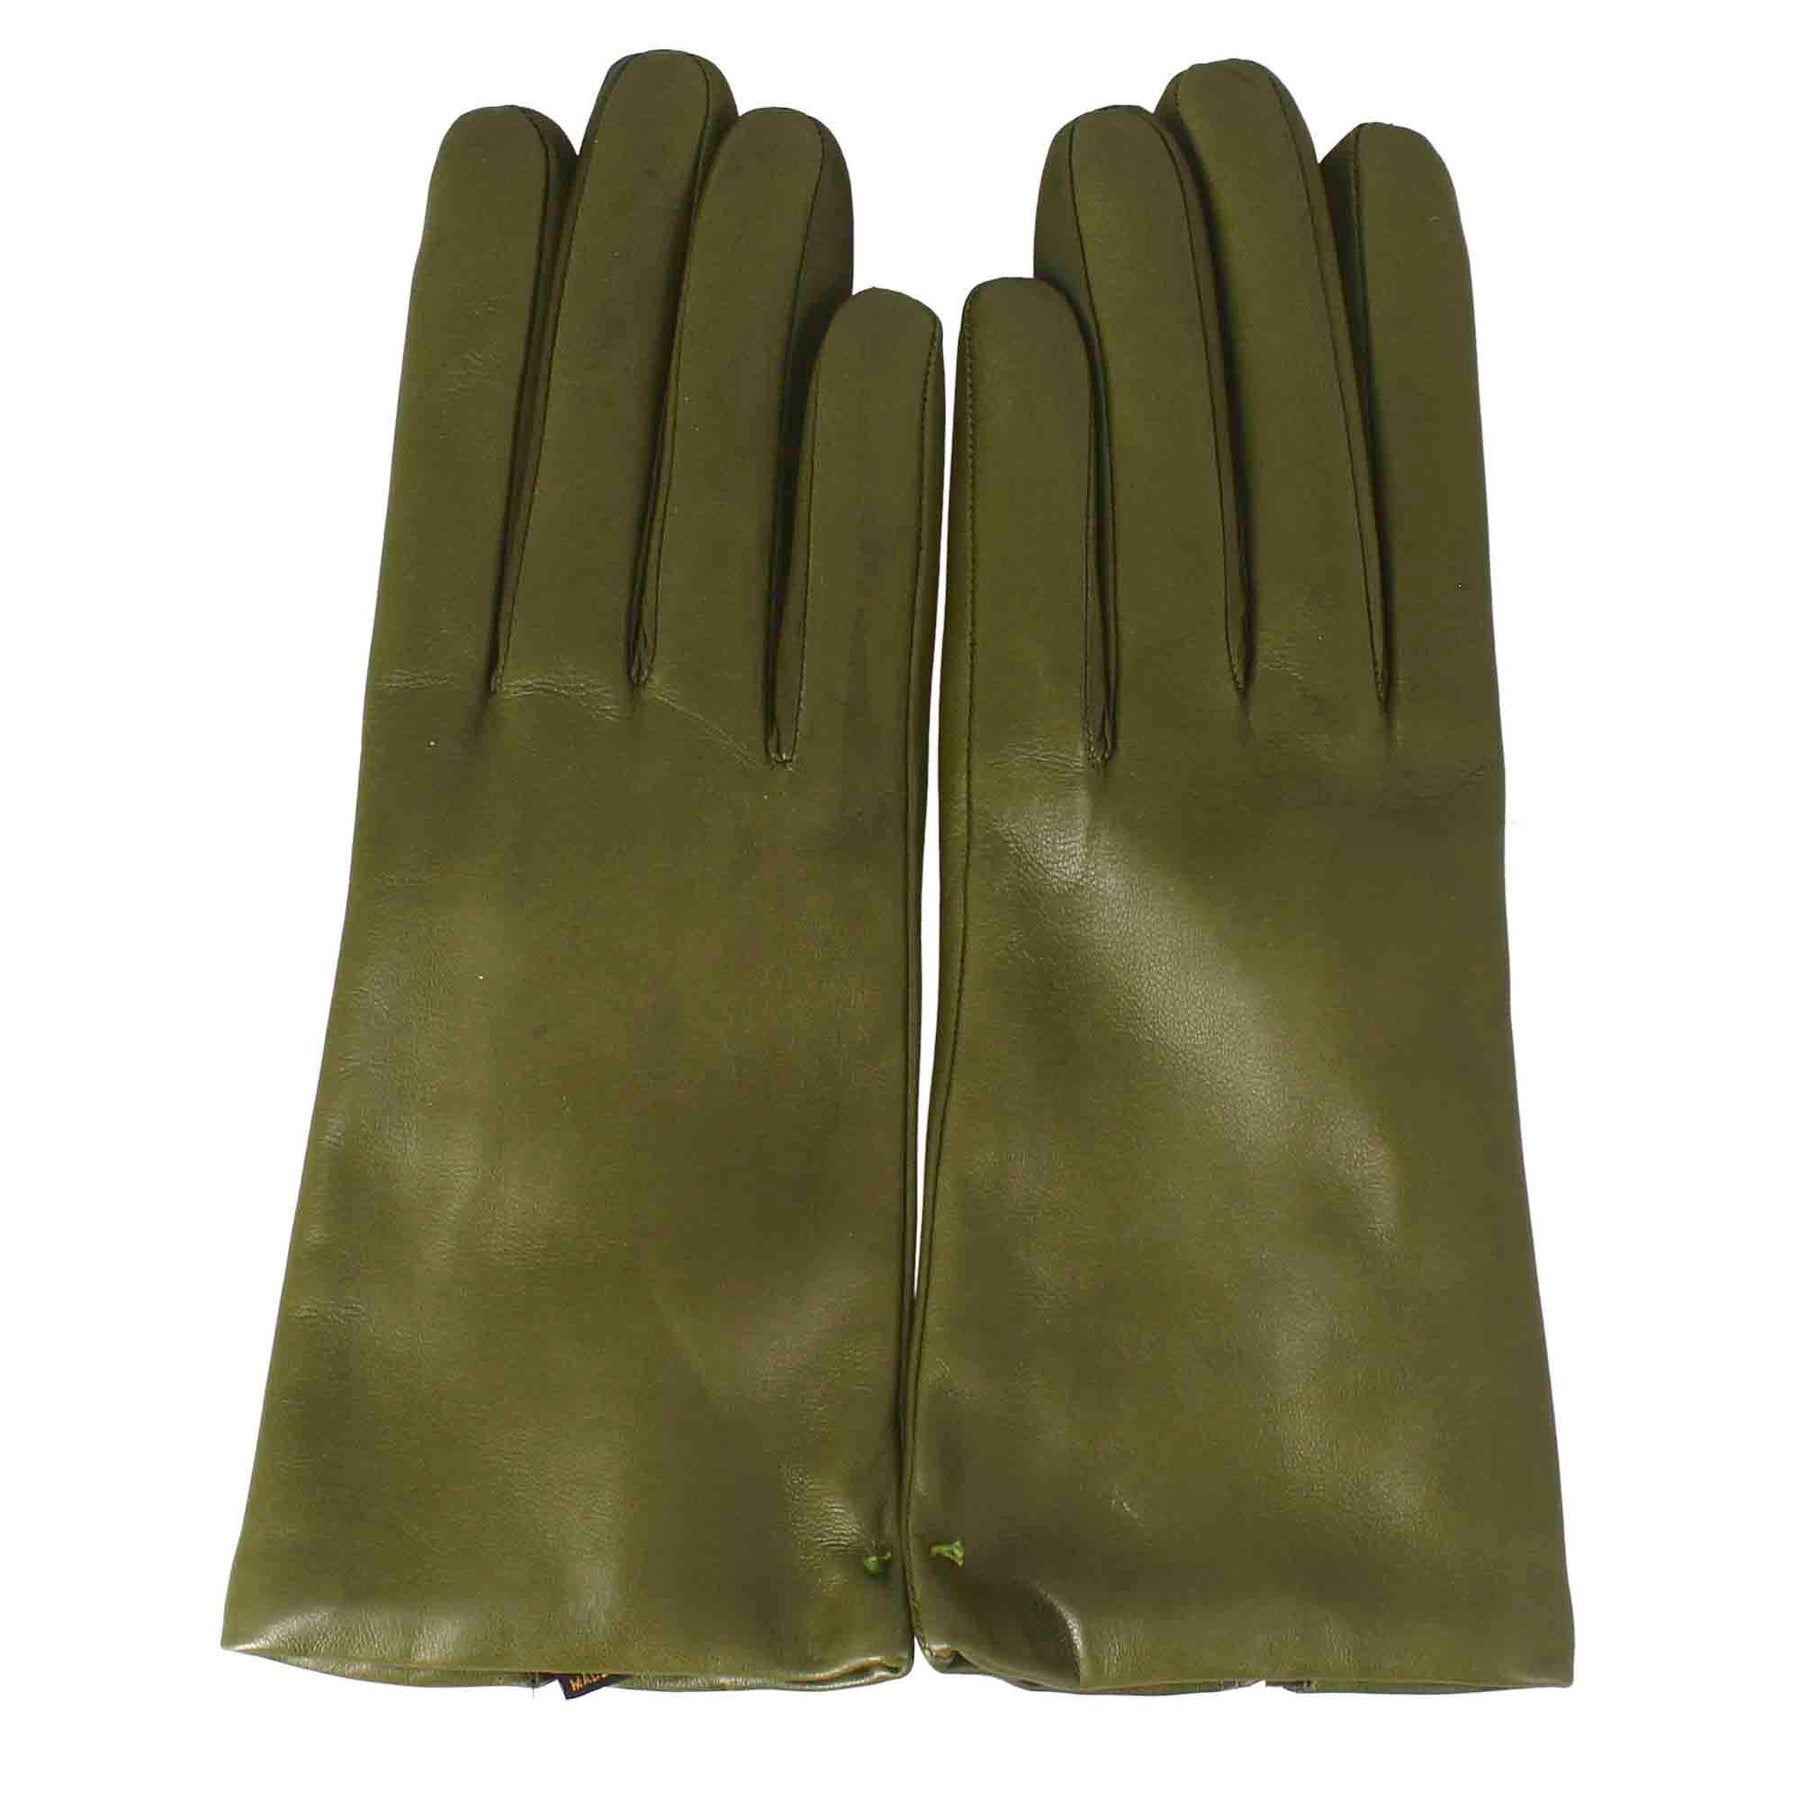 Women's glove in smooth green leather with cashmere lining